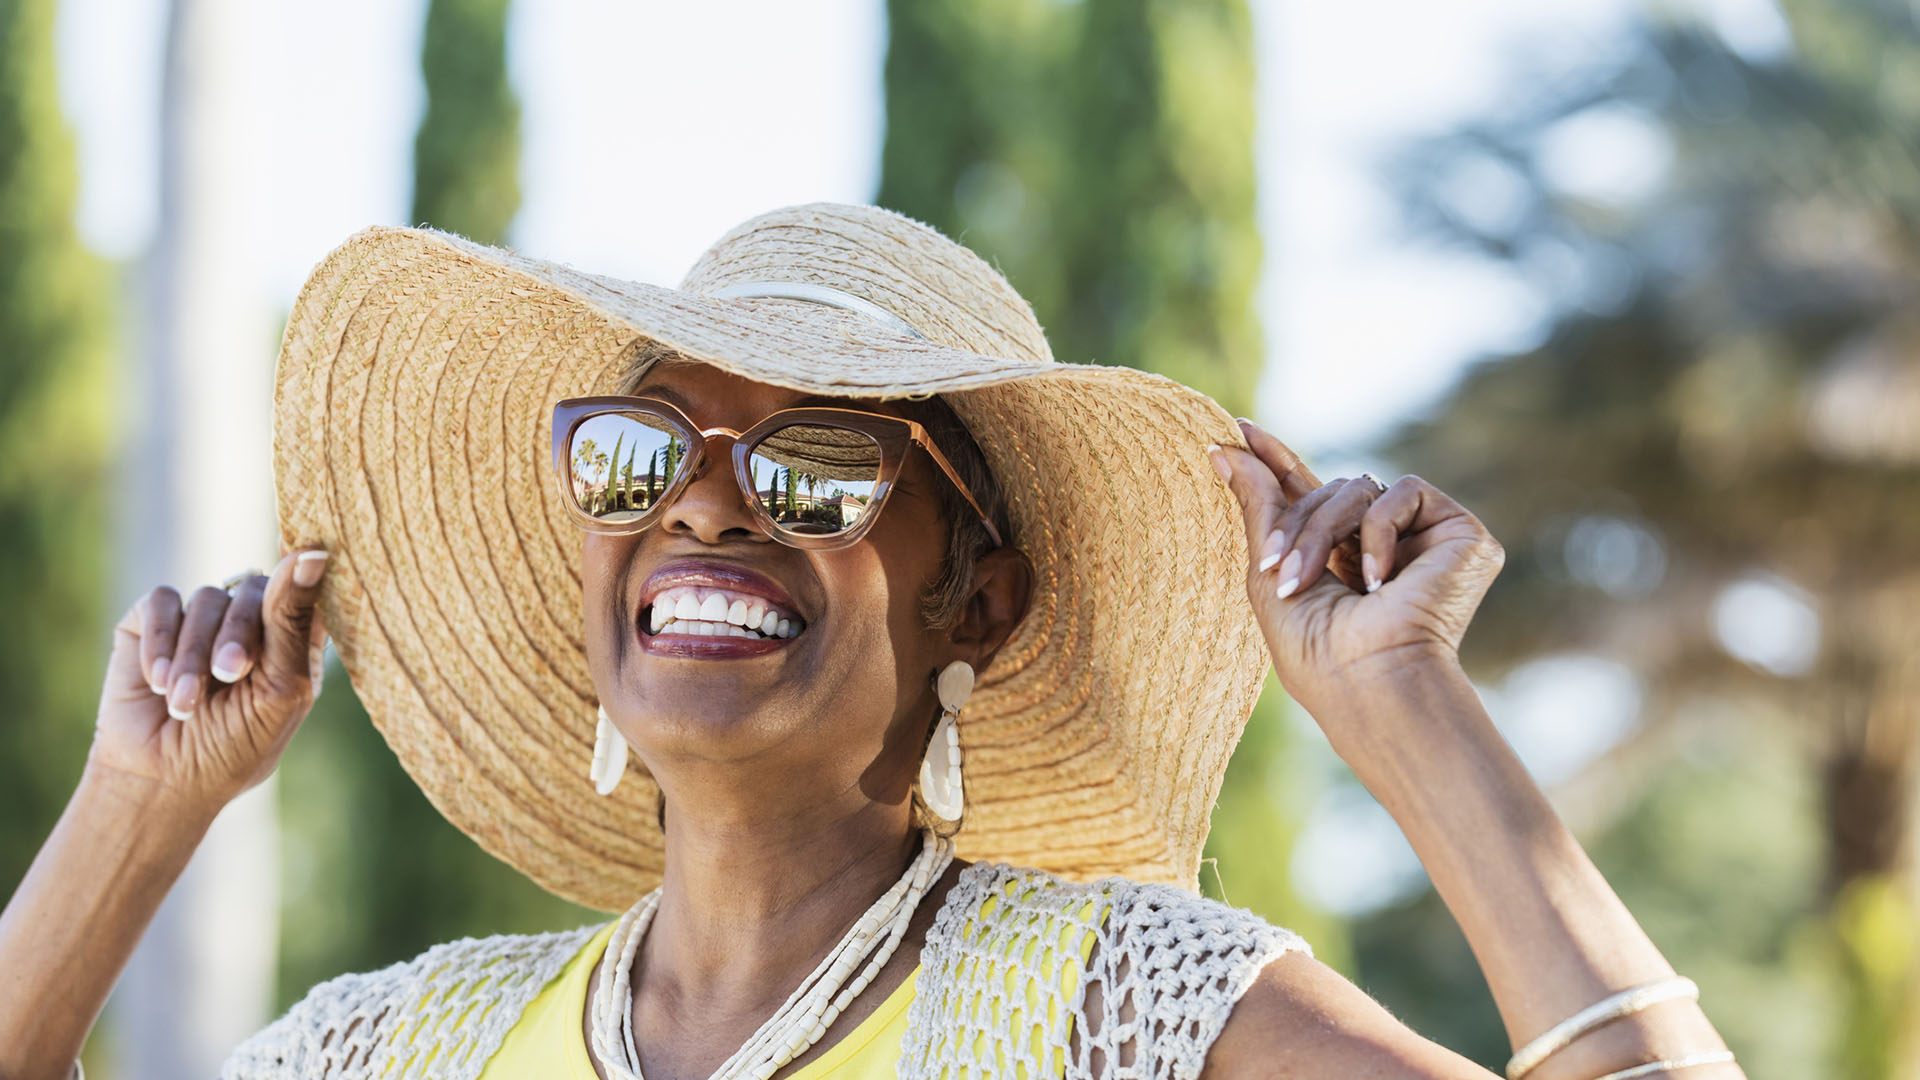 senior woman smiling outside in the summer following summer safety tips for seniors with a hat and sunglasses